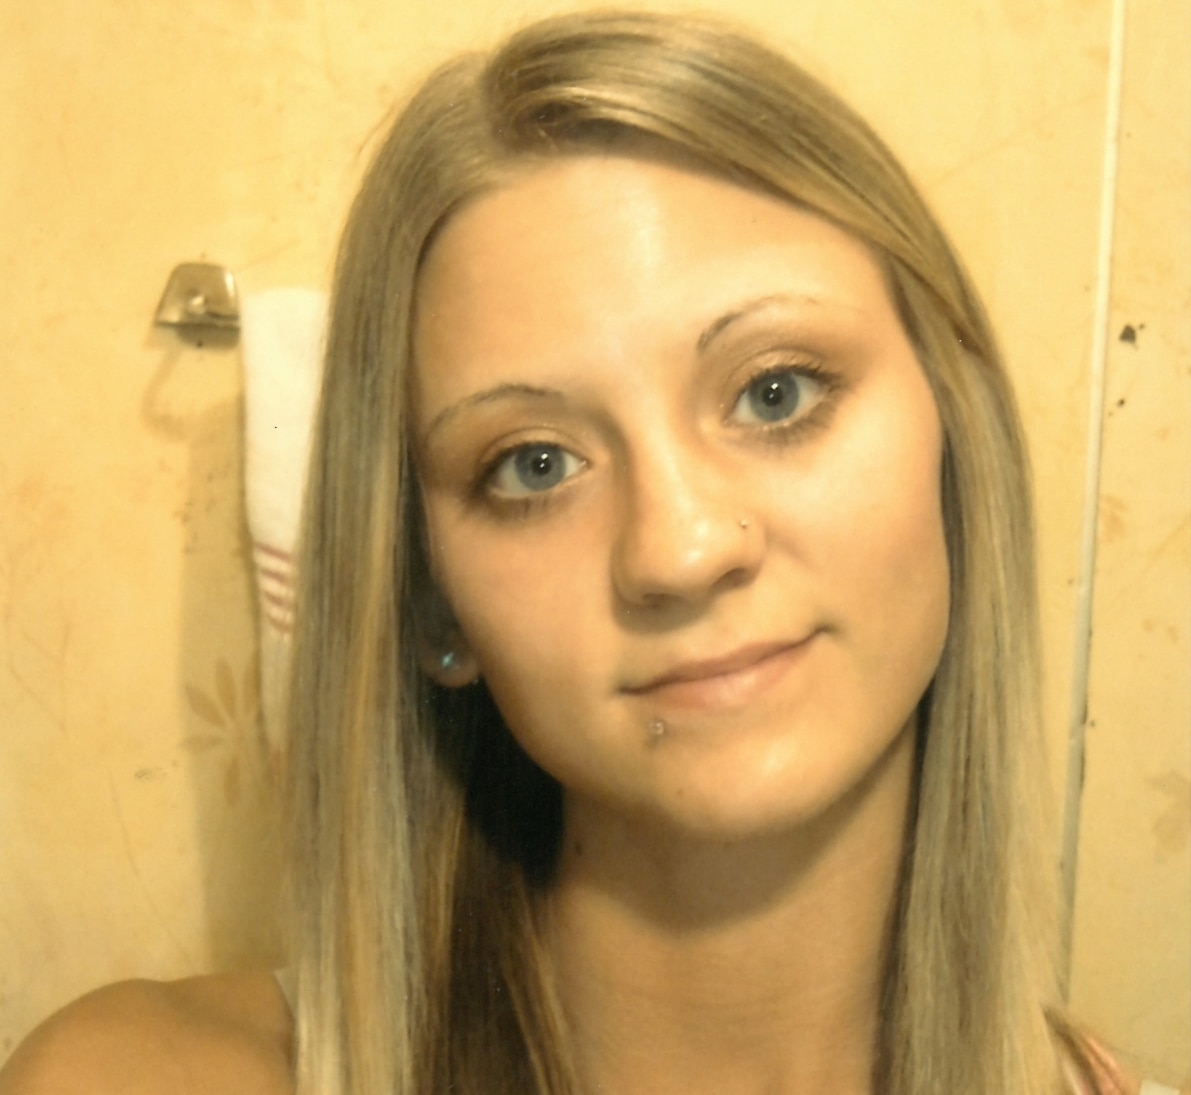 Who Was Jessica Chambers, The Cheerleader Burned Alive in Courtland